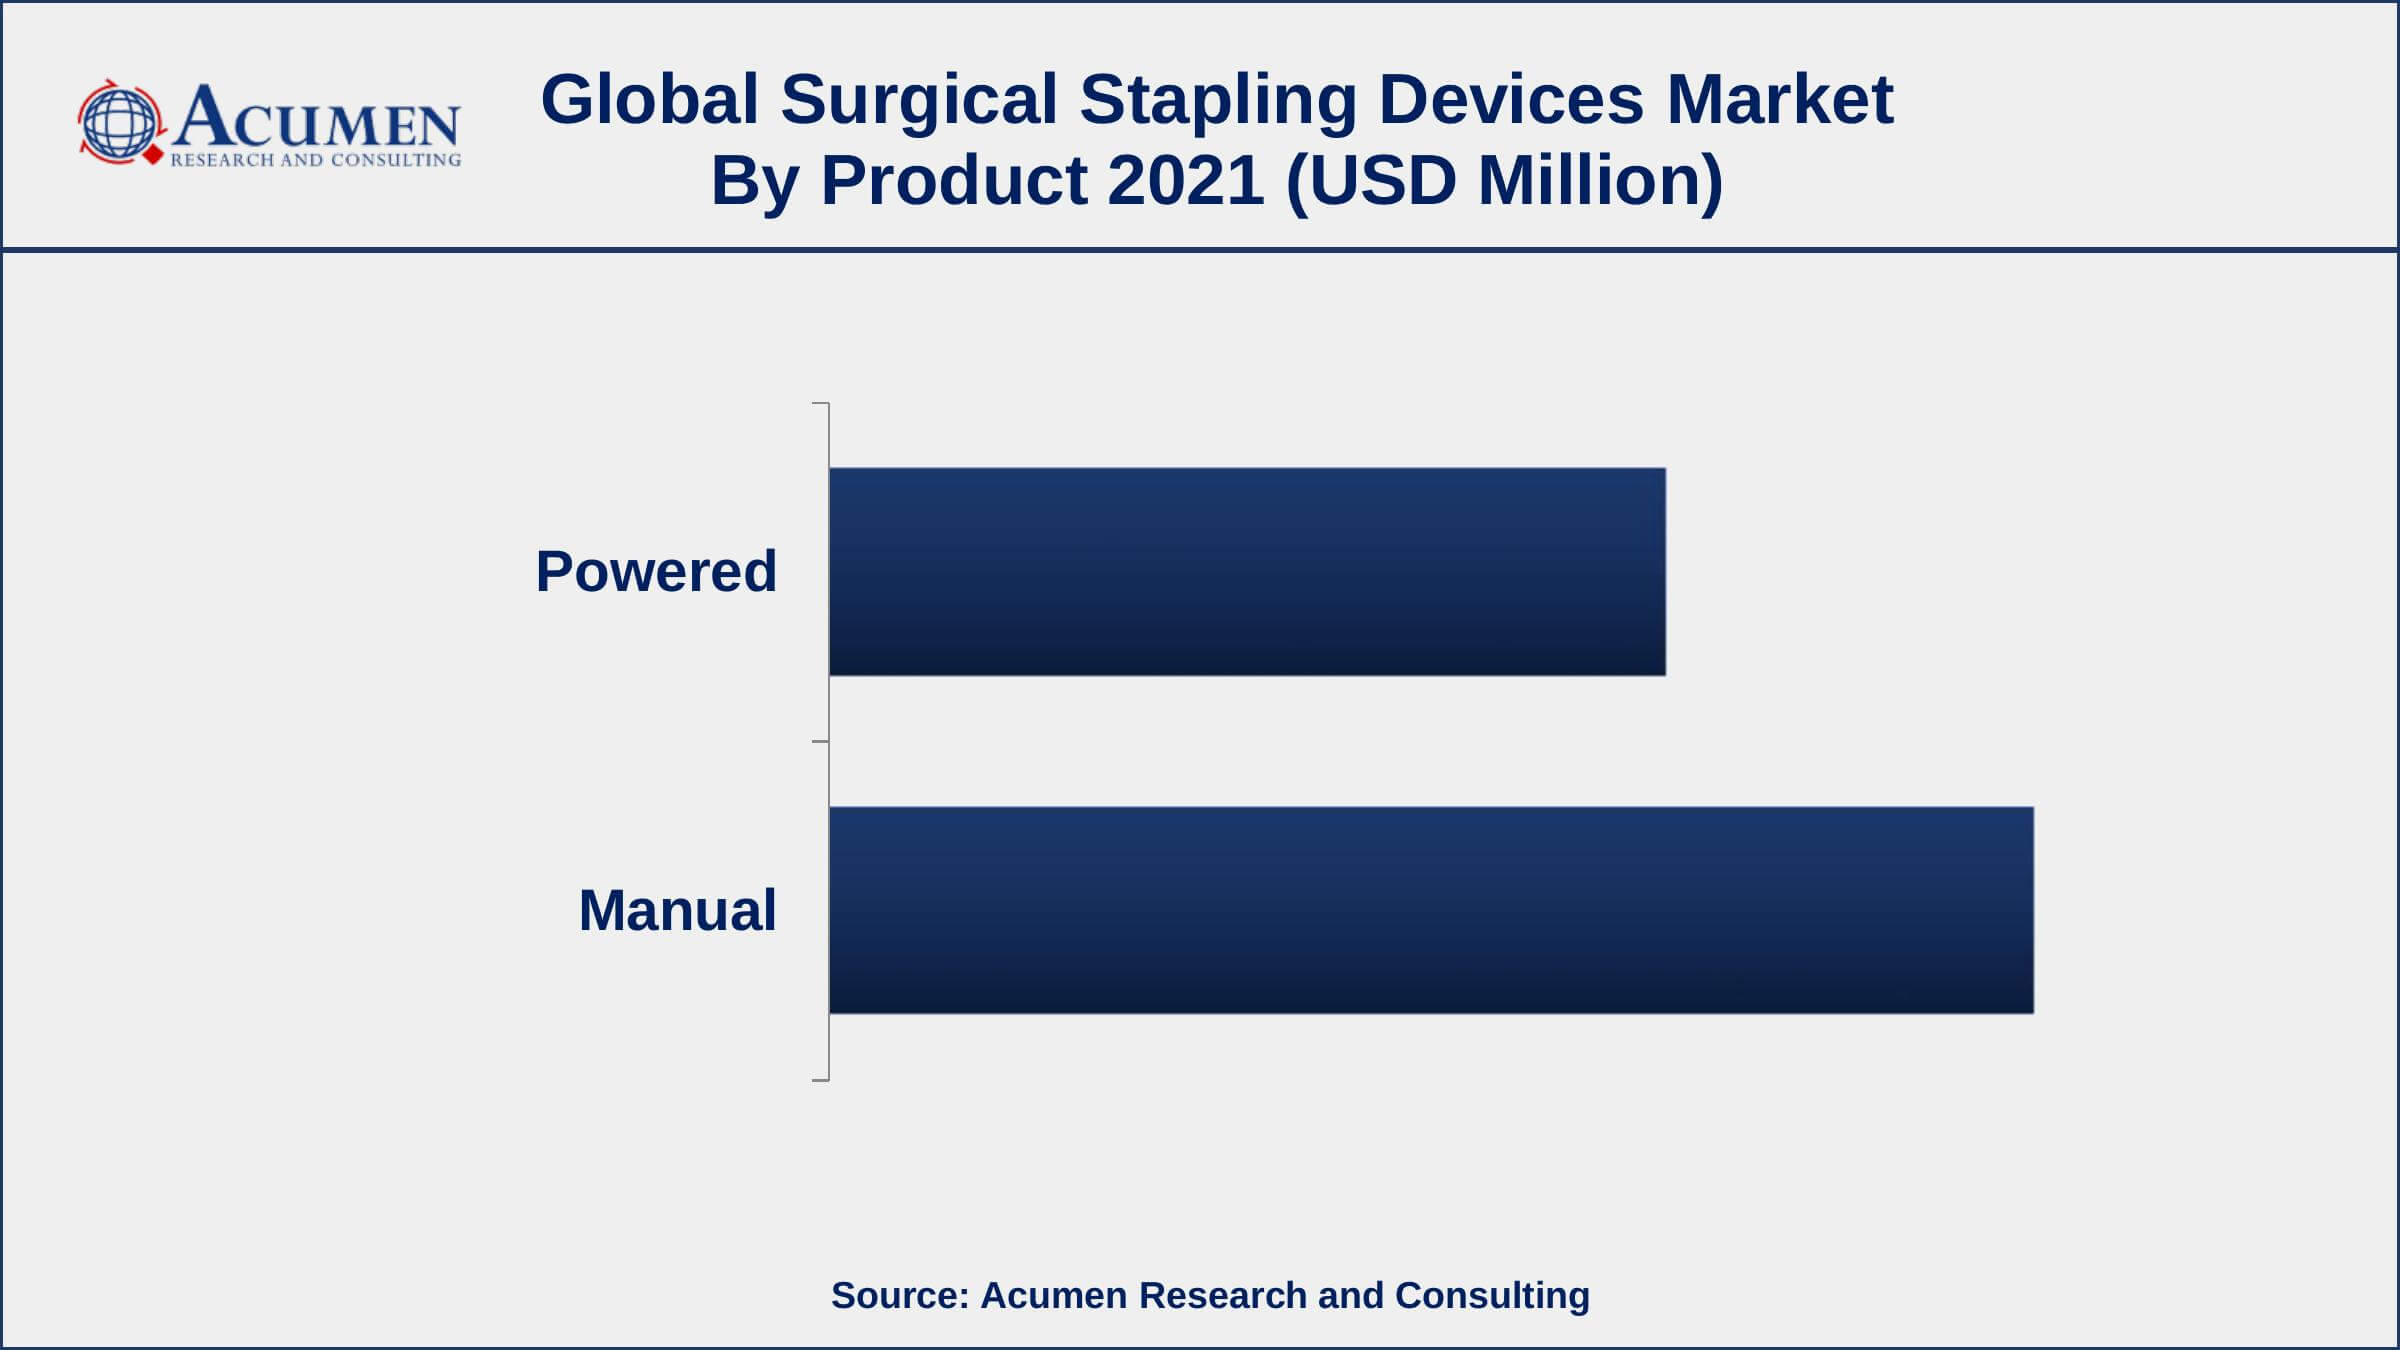 By product, manual devices segment engaged more than 59% of the total market share in 2021